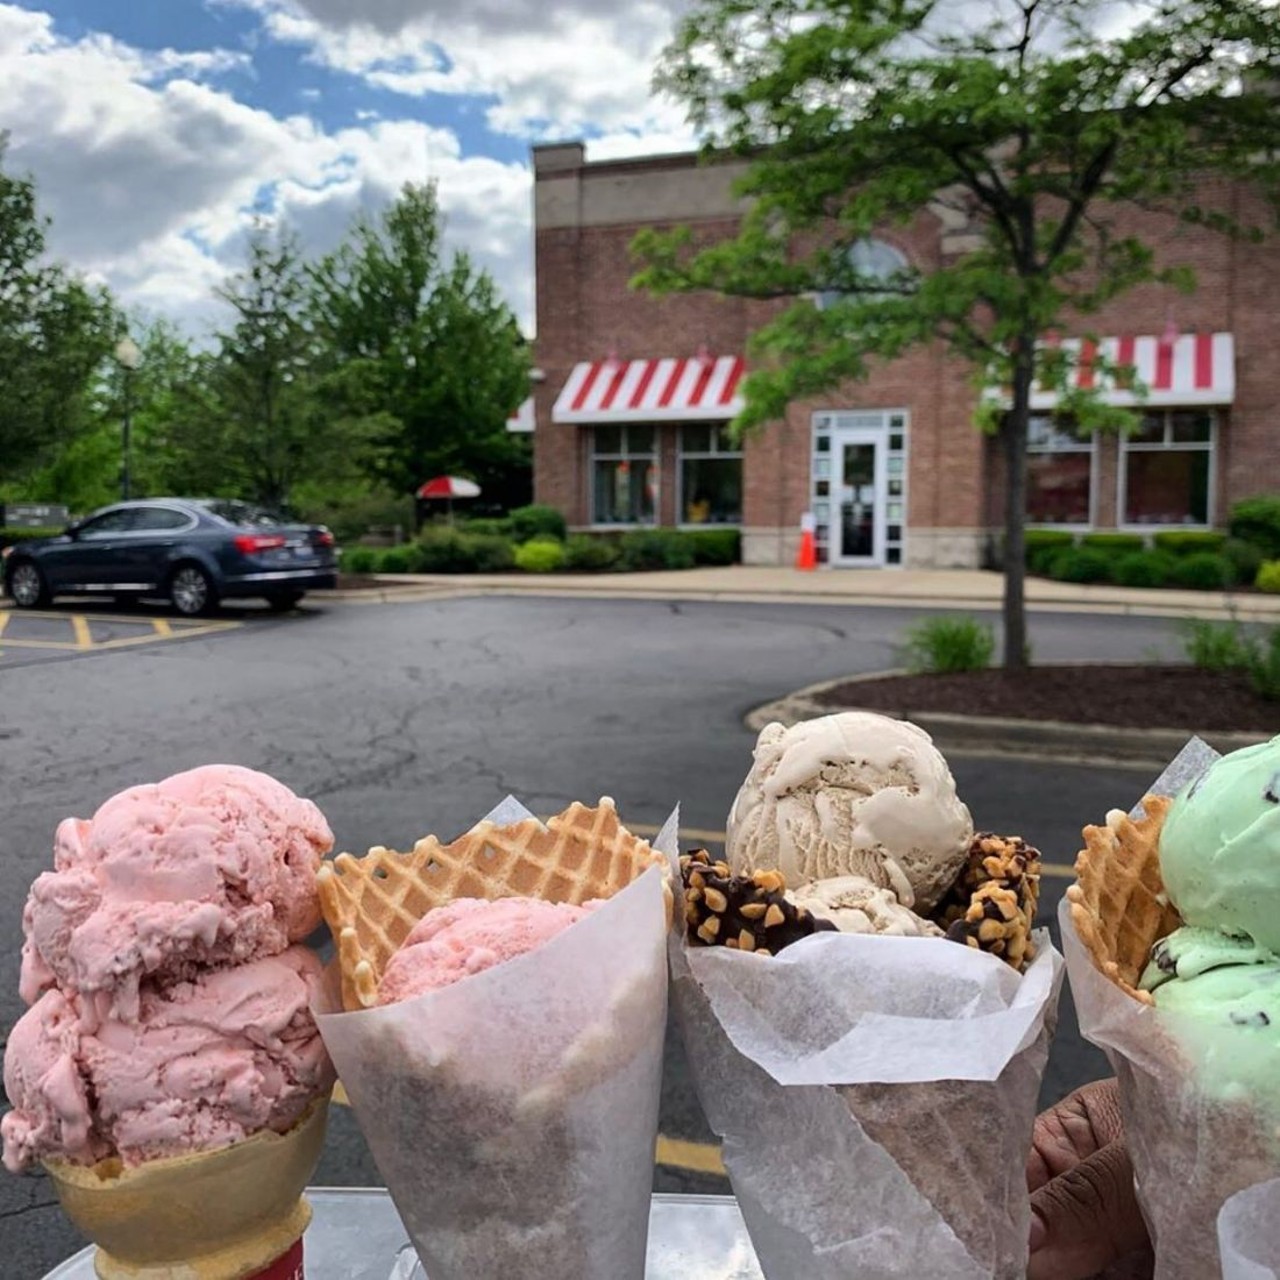 Oberweis Ice Cream and Dairy Store
32808 Woodward Ave., Royal Oak; 248-565-1071 | 6854 Rochester Rd., Troy; 248-250-9574; oberweis.com
Dair-we ask if you love ice cream? Grab some Lactaid before heading to this classic ice cream paradise. Oberweis is a regional Midwestern chain mostly based in Illinois. Their motto? &#147;Stop when you smell the waffle cone.&#148; The only way we&#146;ll stop is when we feel like puking because we thought three scoops of Birthday Cake flavored ice cream was an Ober-wise idea. Try to control yourselves!
Photo via Oberweis/Facebook